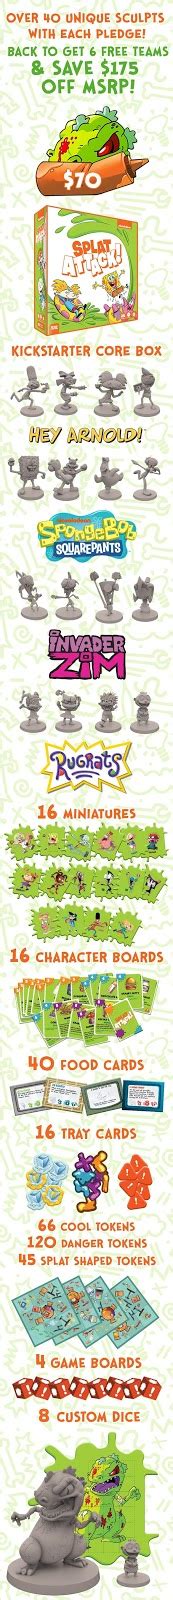 Nickalive Idw Games To Release 90s Nick Themed Nickelodeon Splat Attack Board Game